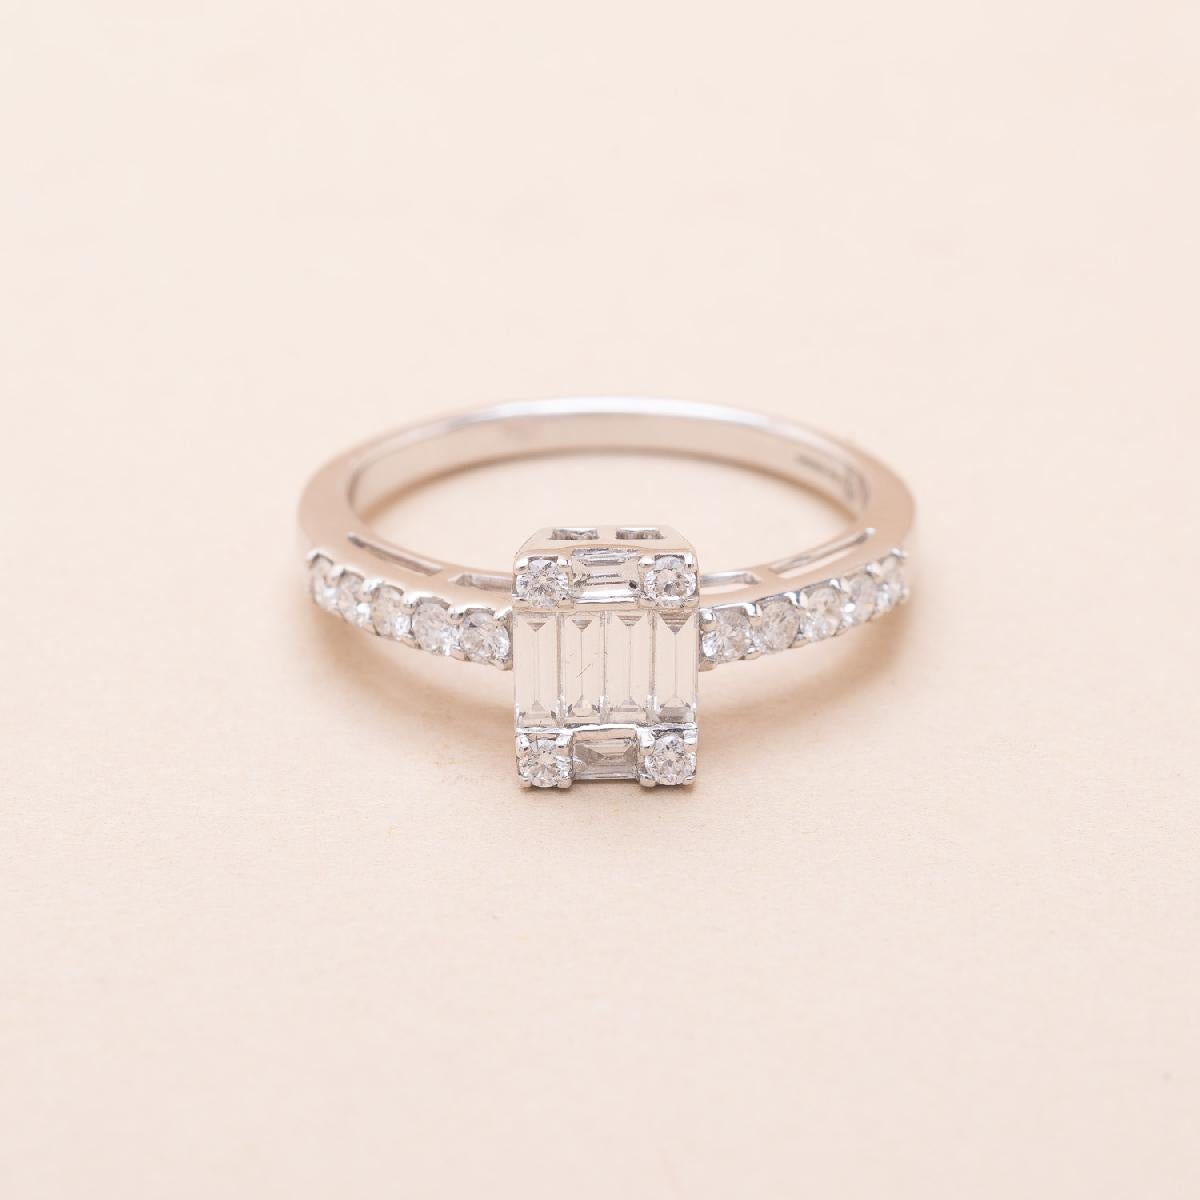 18K white gold baguette and round brilliant cut diamonds. 1.20 carat total. 
Estimated diamonds characteristics : Color F, Purity VVS, fluorescence none to faint.

French creation from the 2000s, never worn

The stones on the bezel gives the